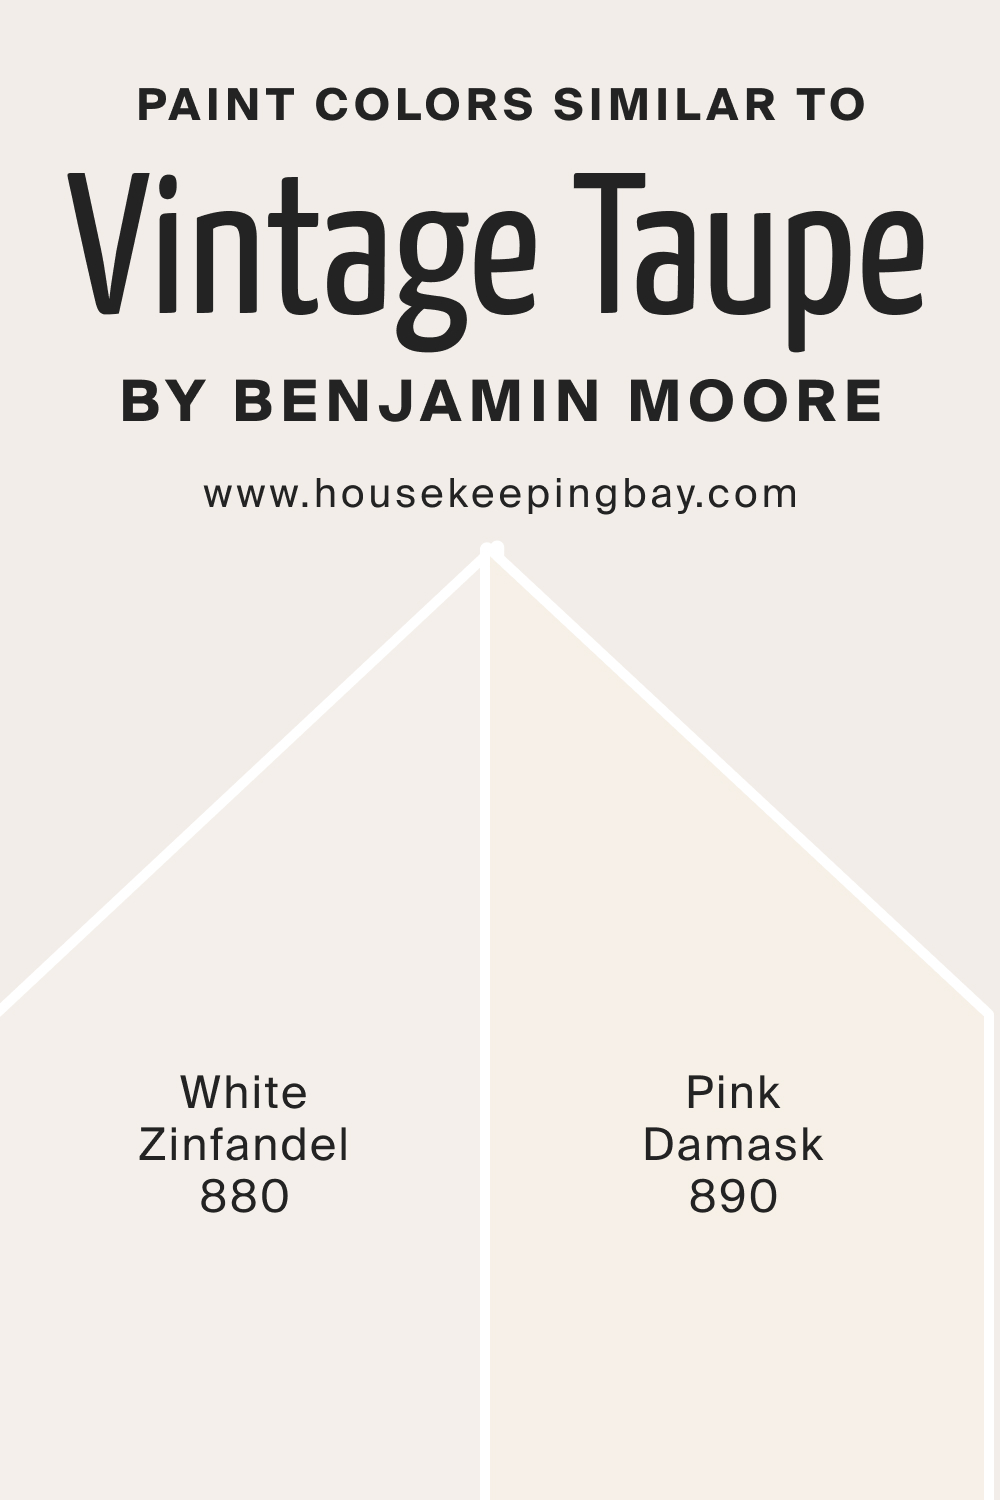 Paint Colors Similar to Vintage Taupe 2110 70 by Benjamin Moore